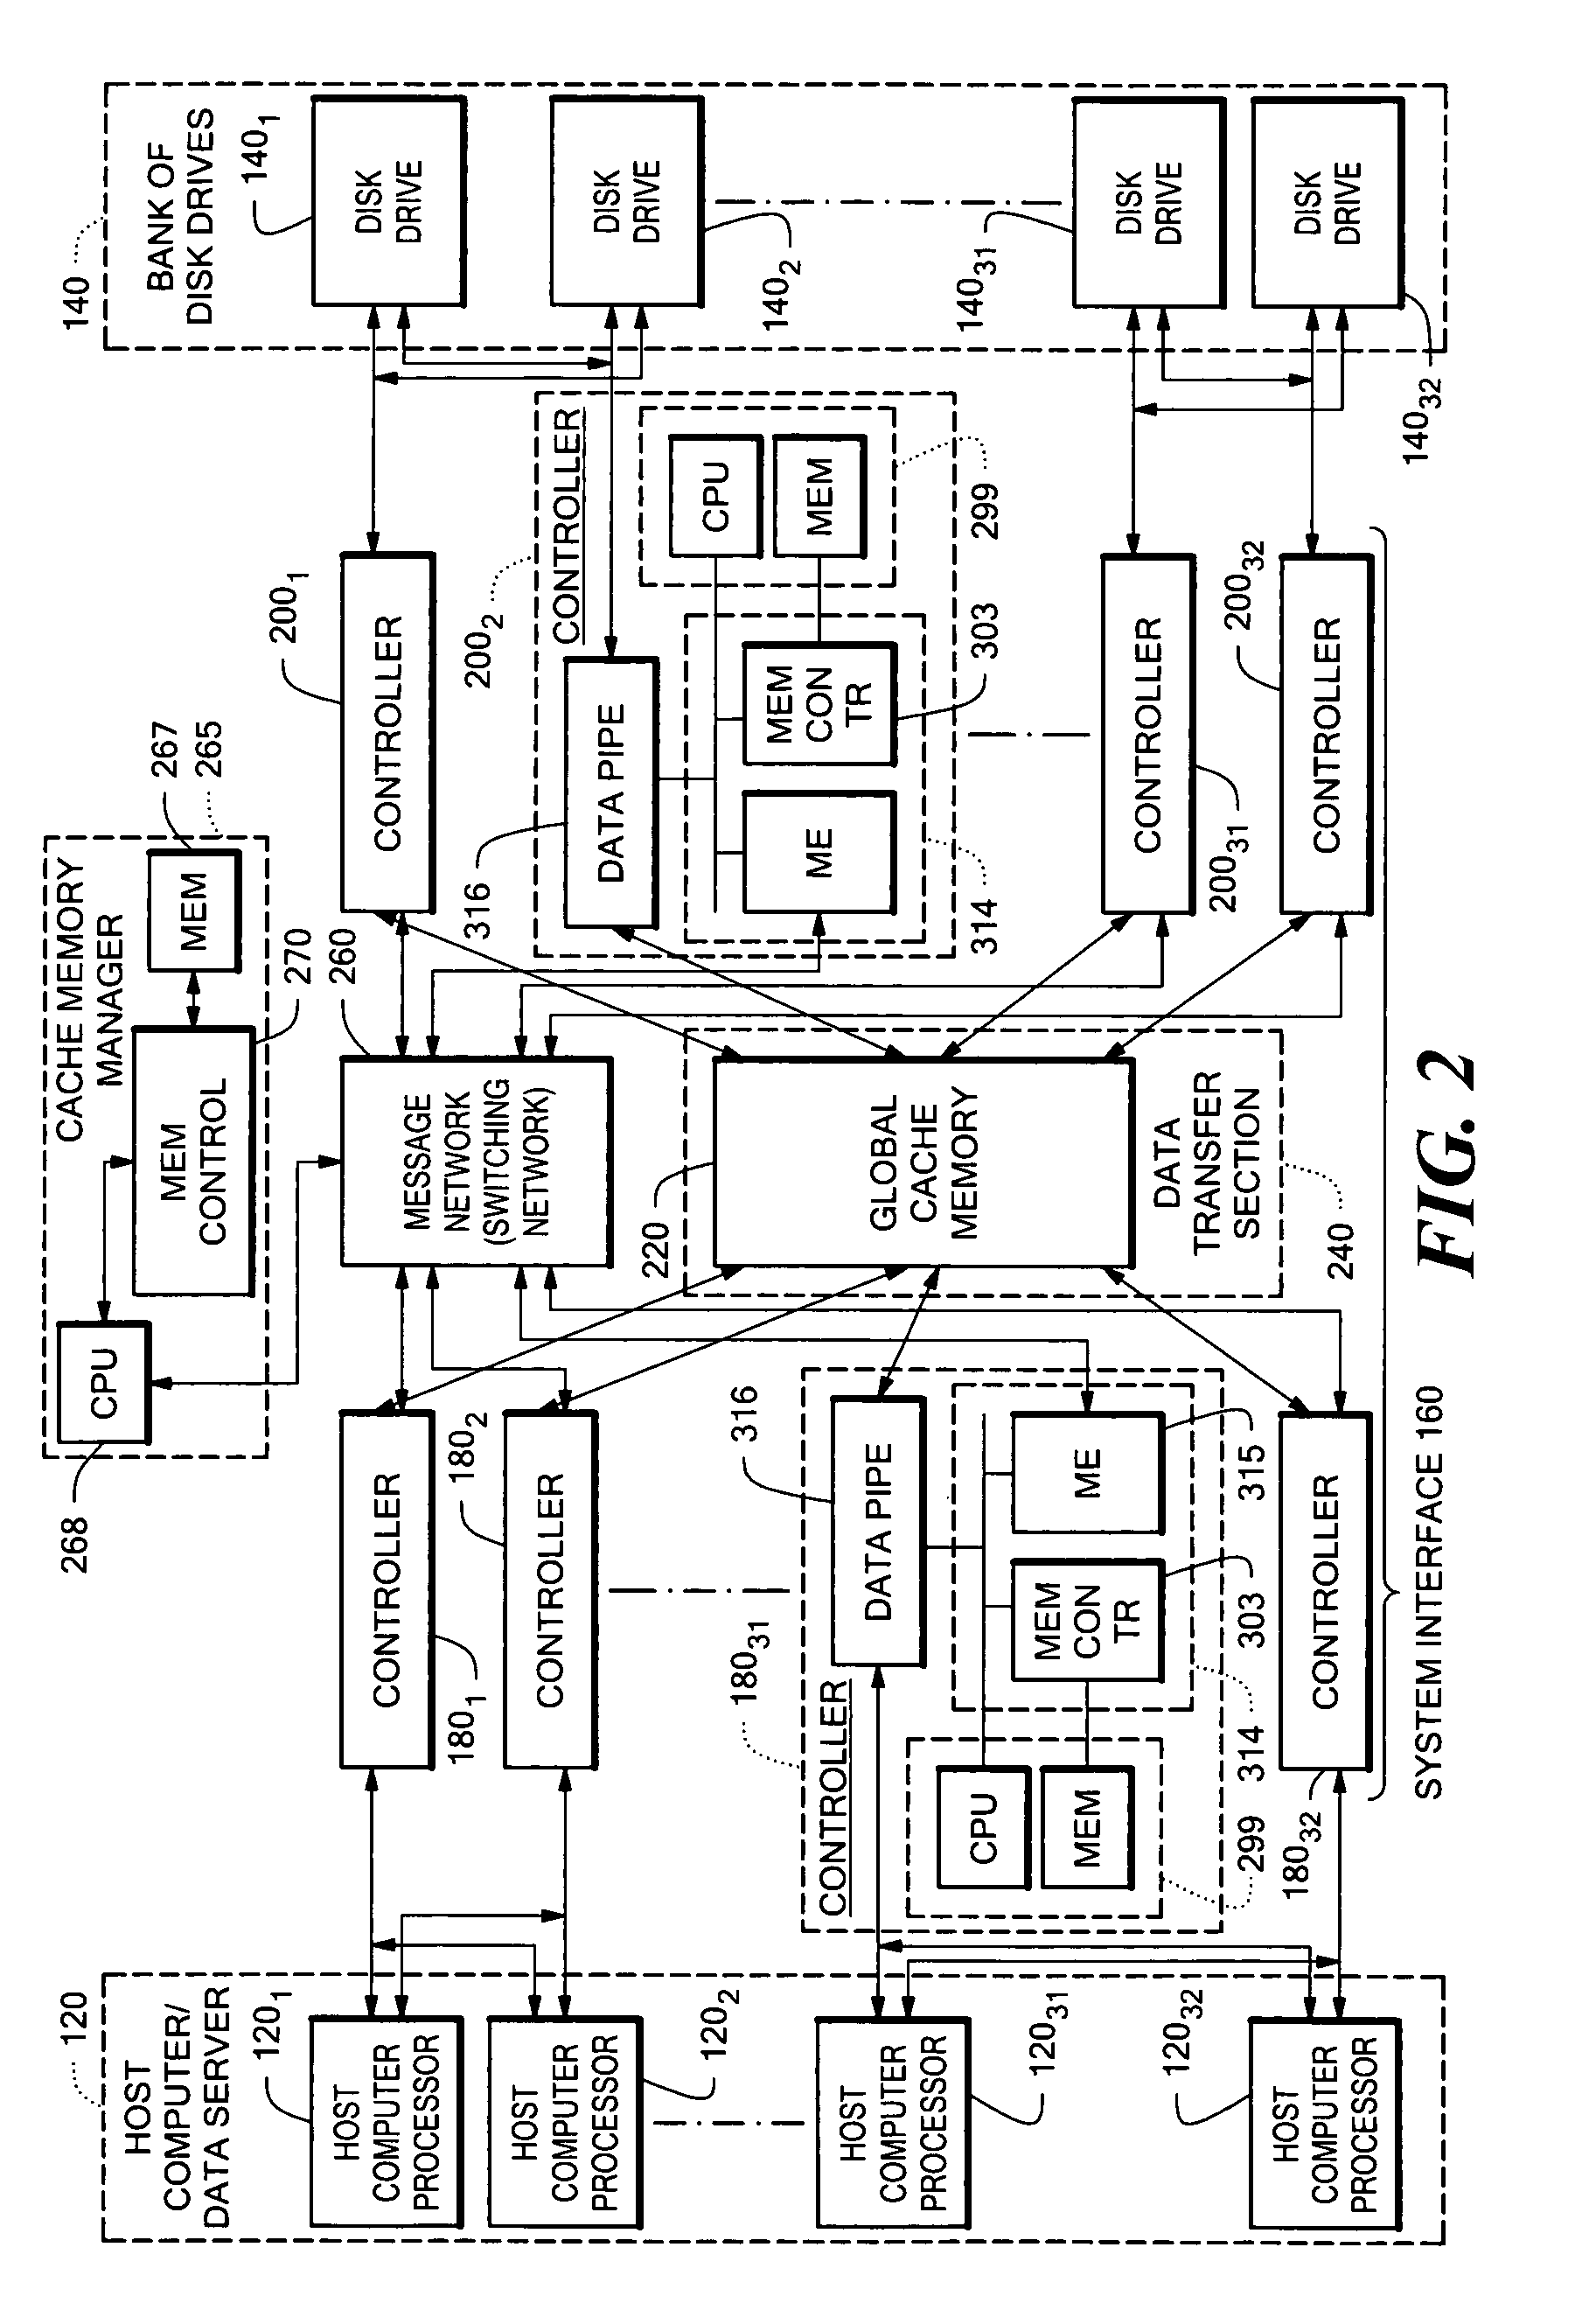 Data storage system having cache memory manager with packet switching network